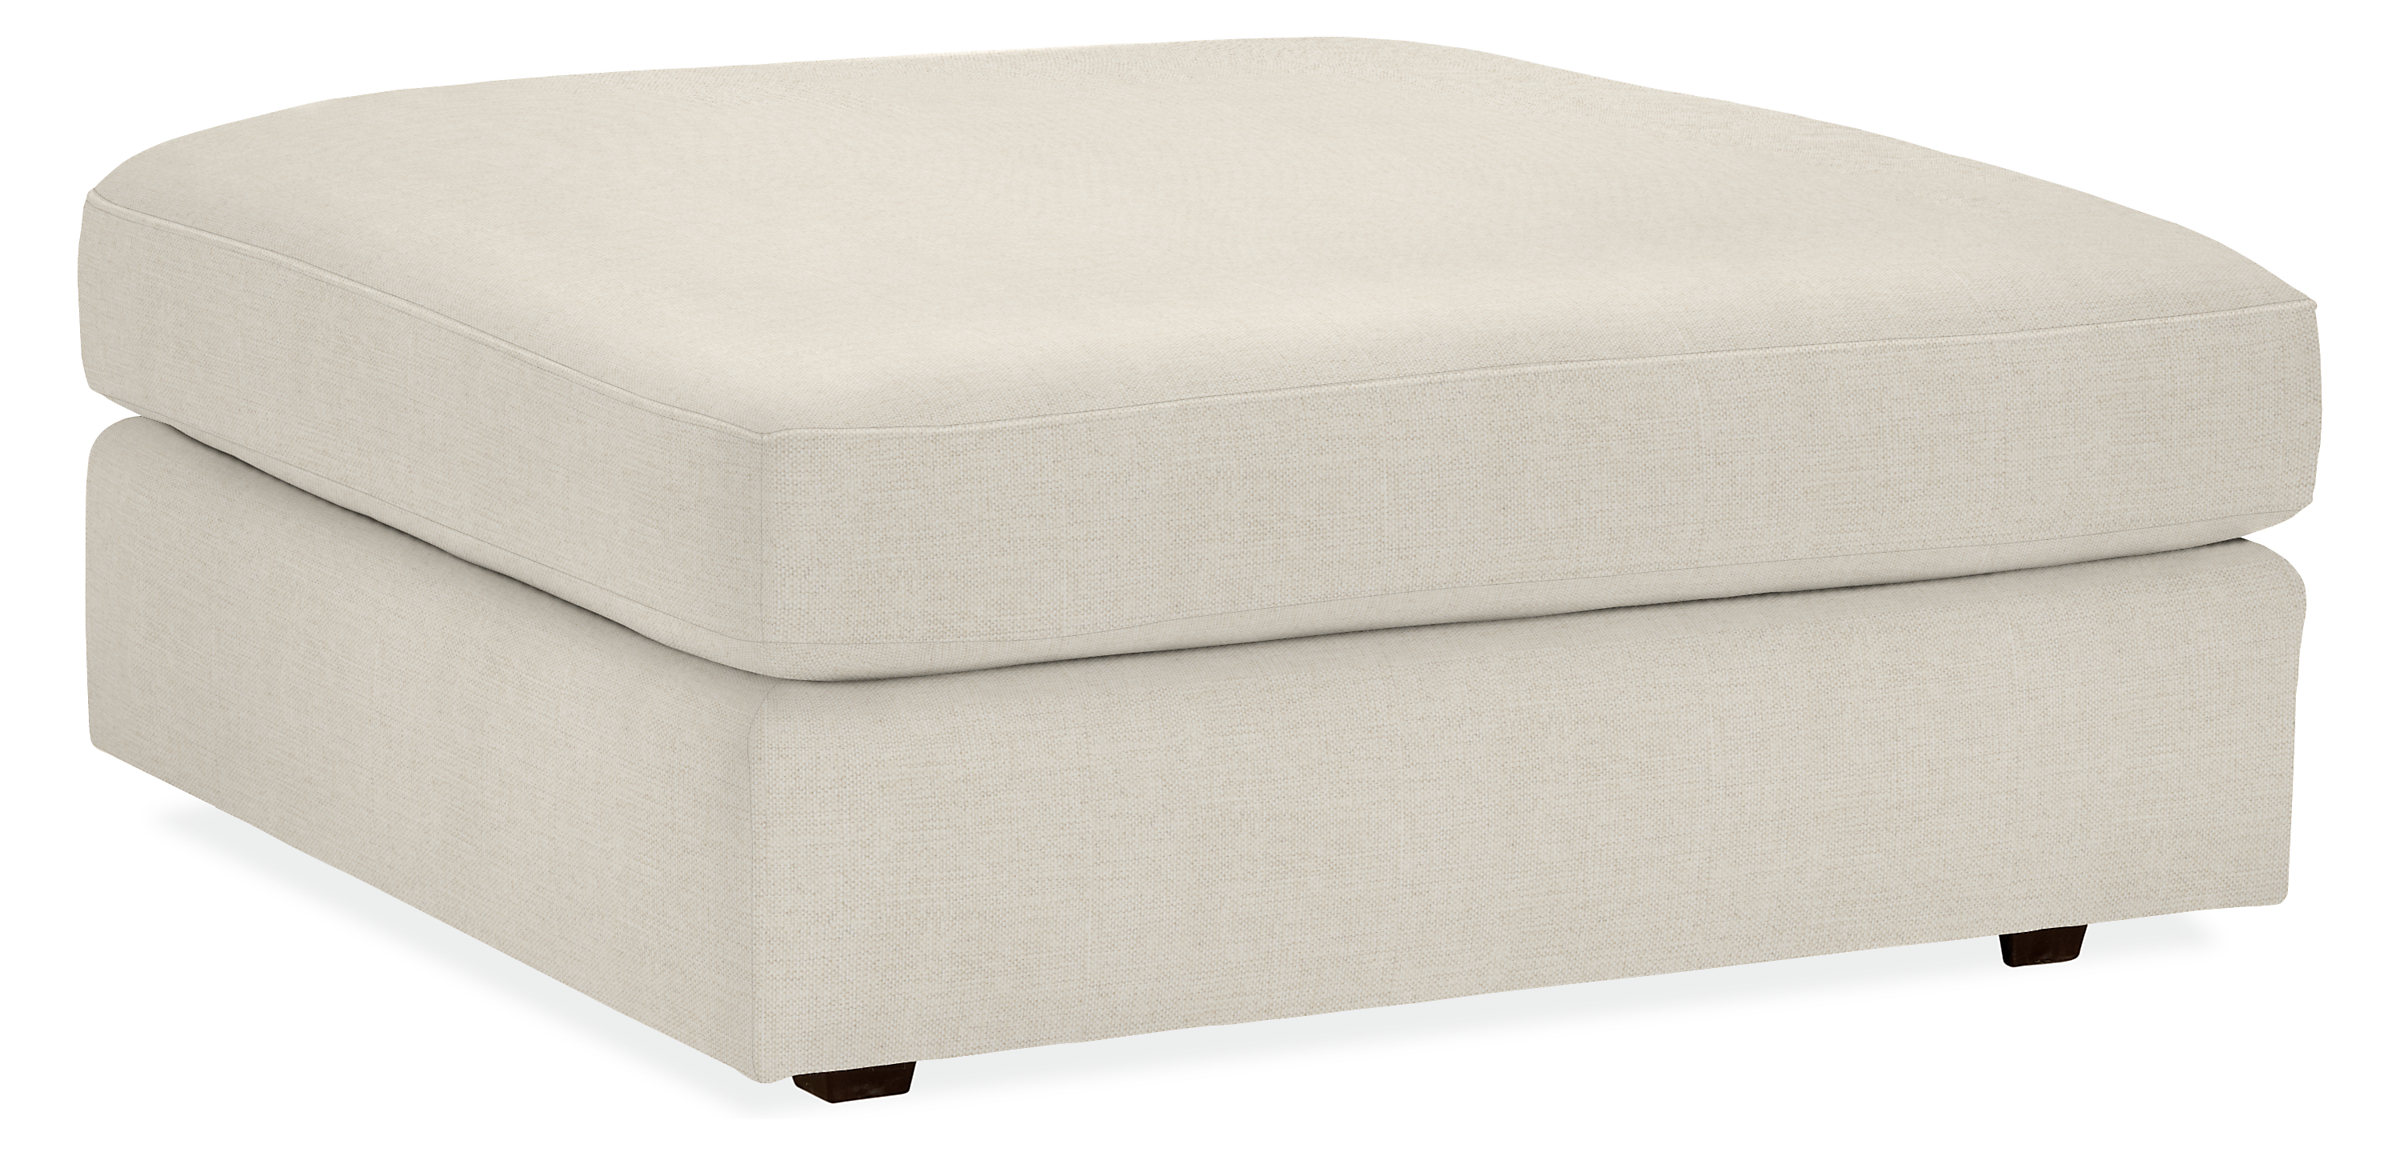 Astaire 37w 37d 16h Square Ottoman